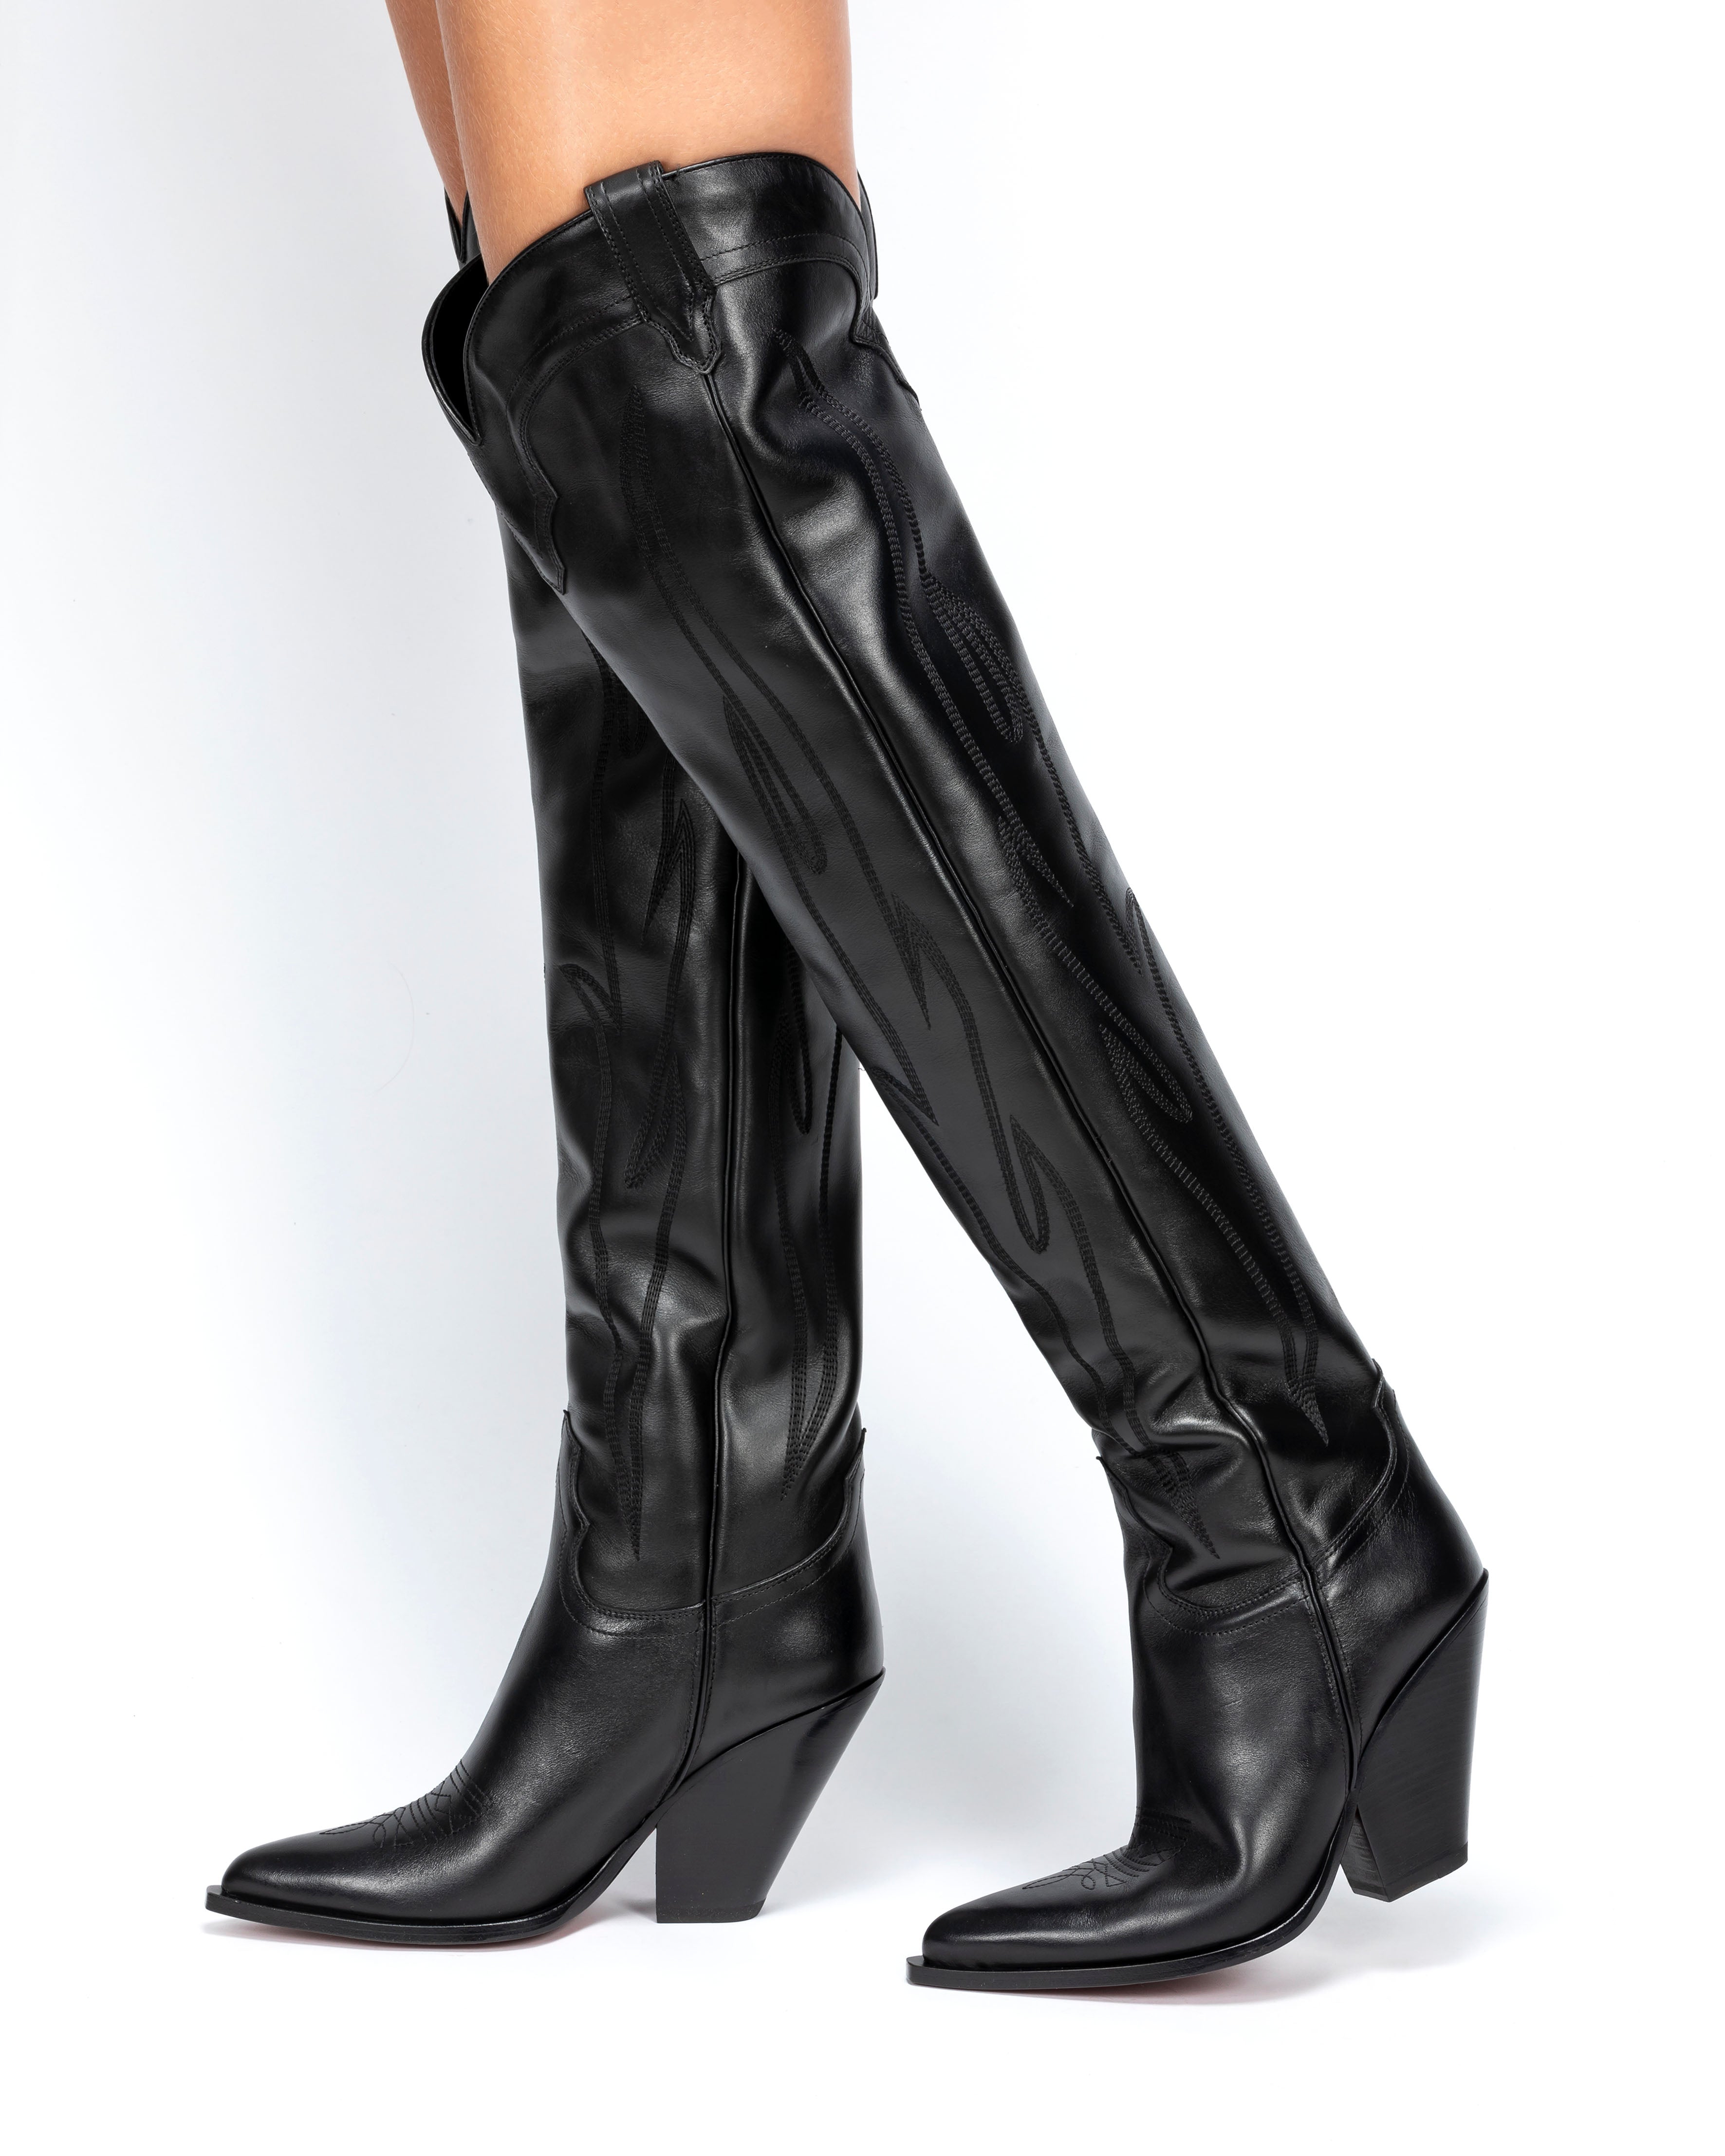 HERMOSA-90-Women_s-Over-The-Knee-Boots-in-Black-Calfskin--On-Tone-Embroidery_03